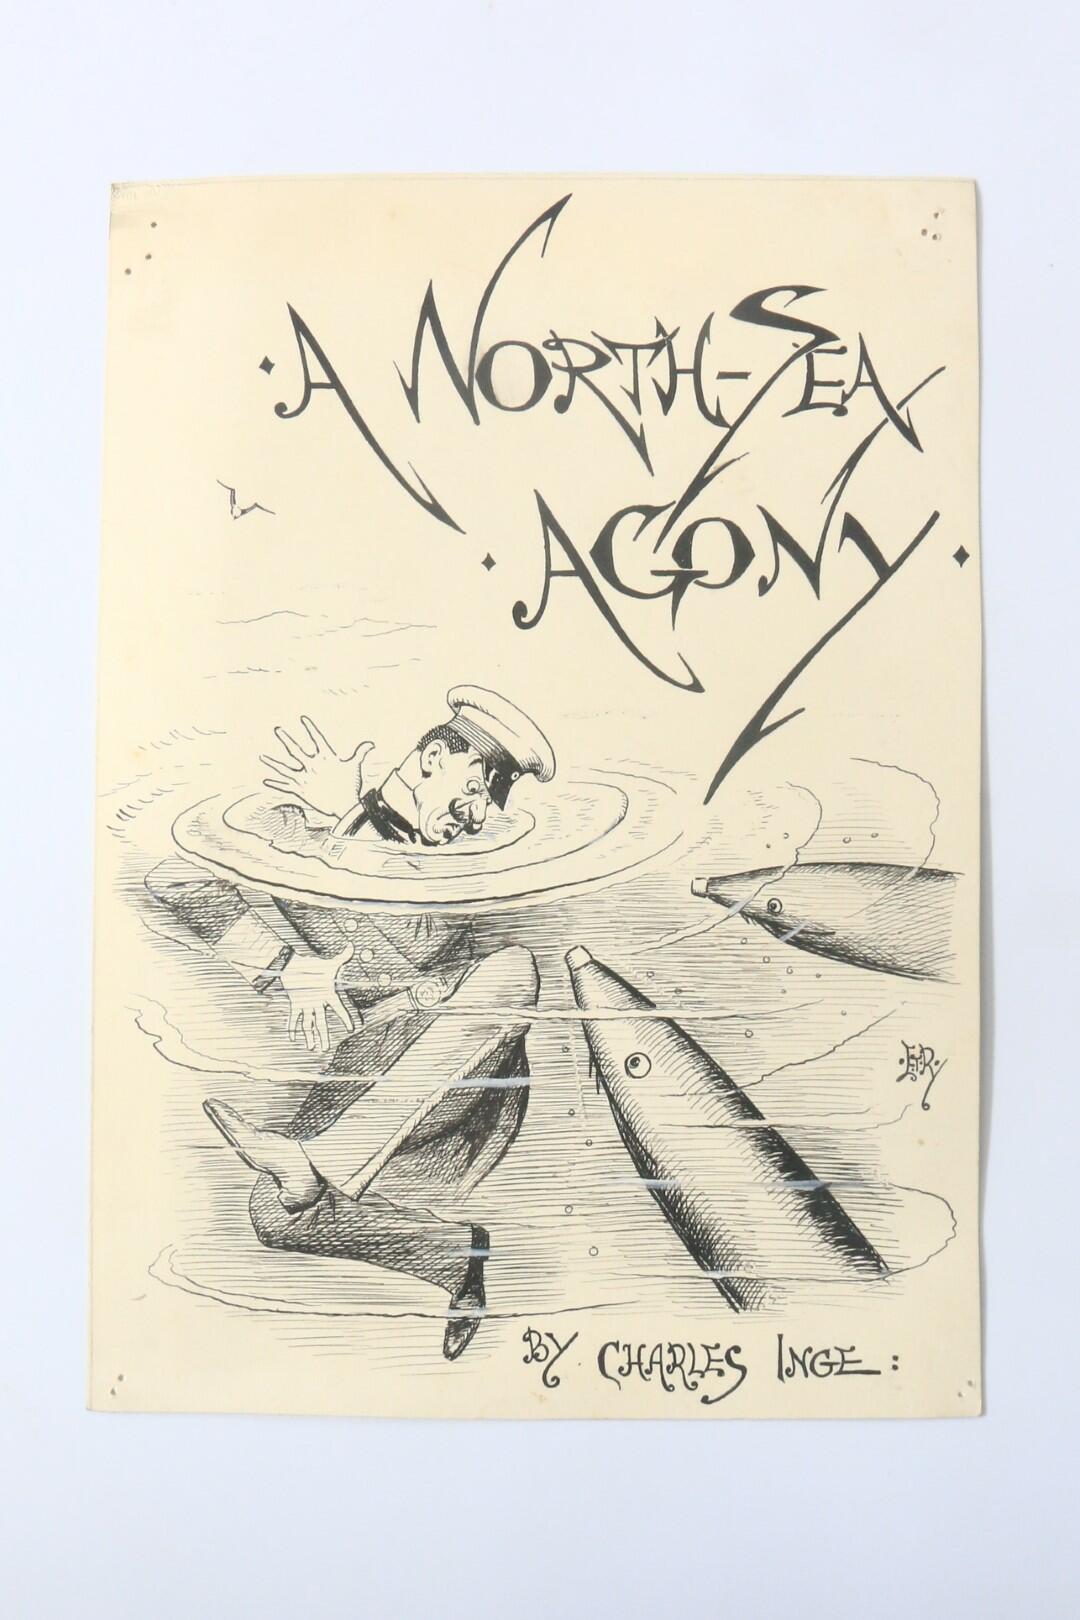 E.T. Reed - Original Artwork for Charles Inge's A North-Sea Agony - , , . Signed